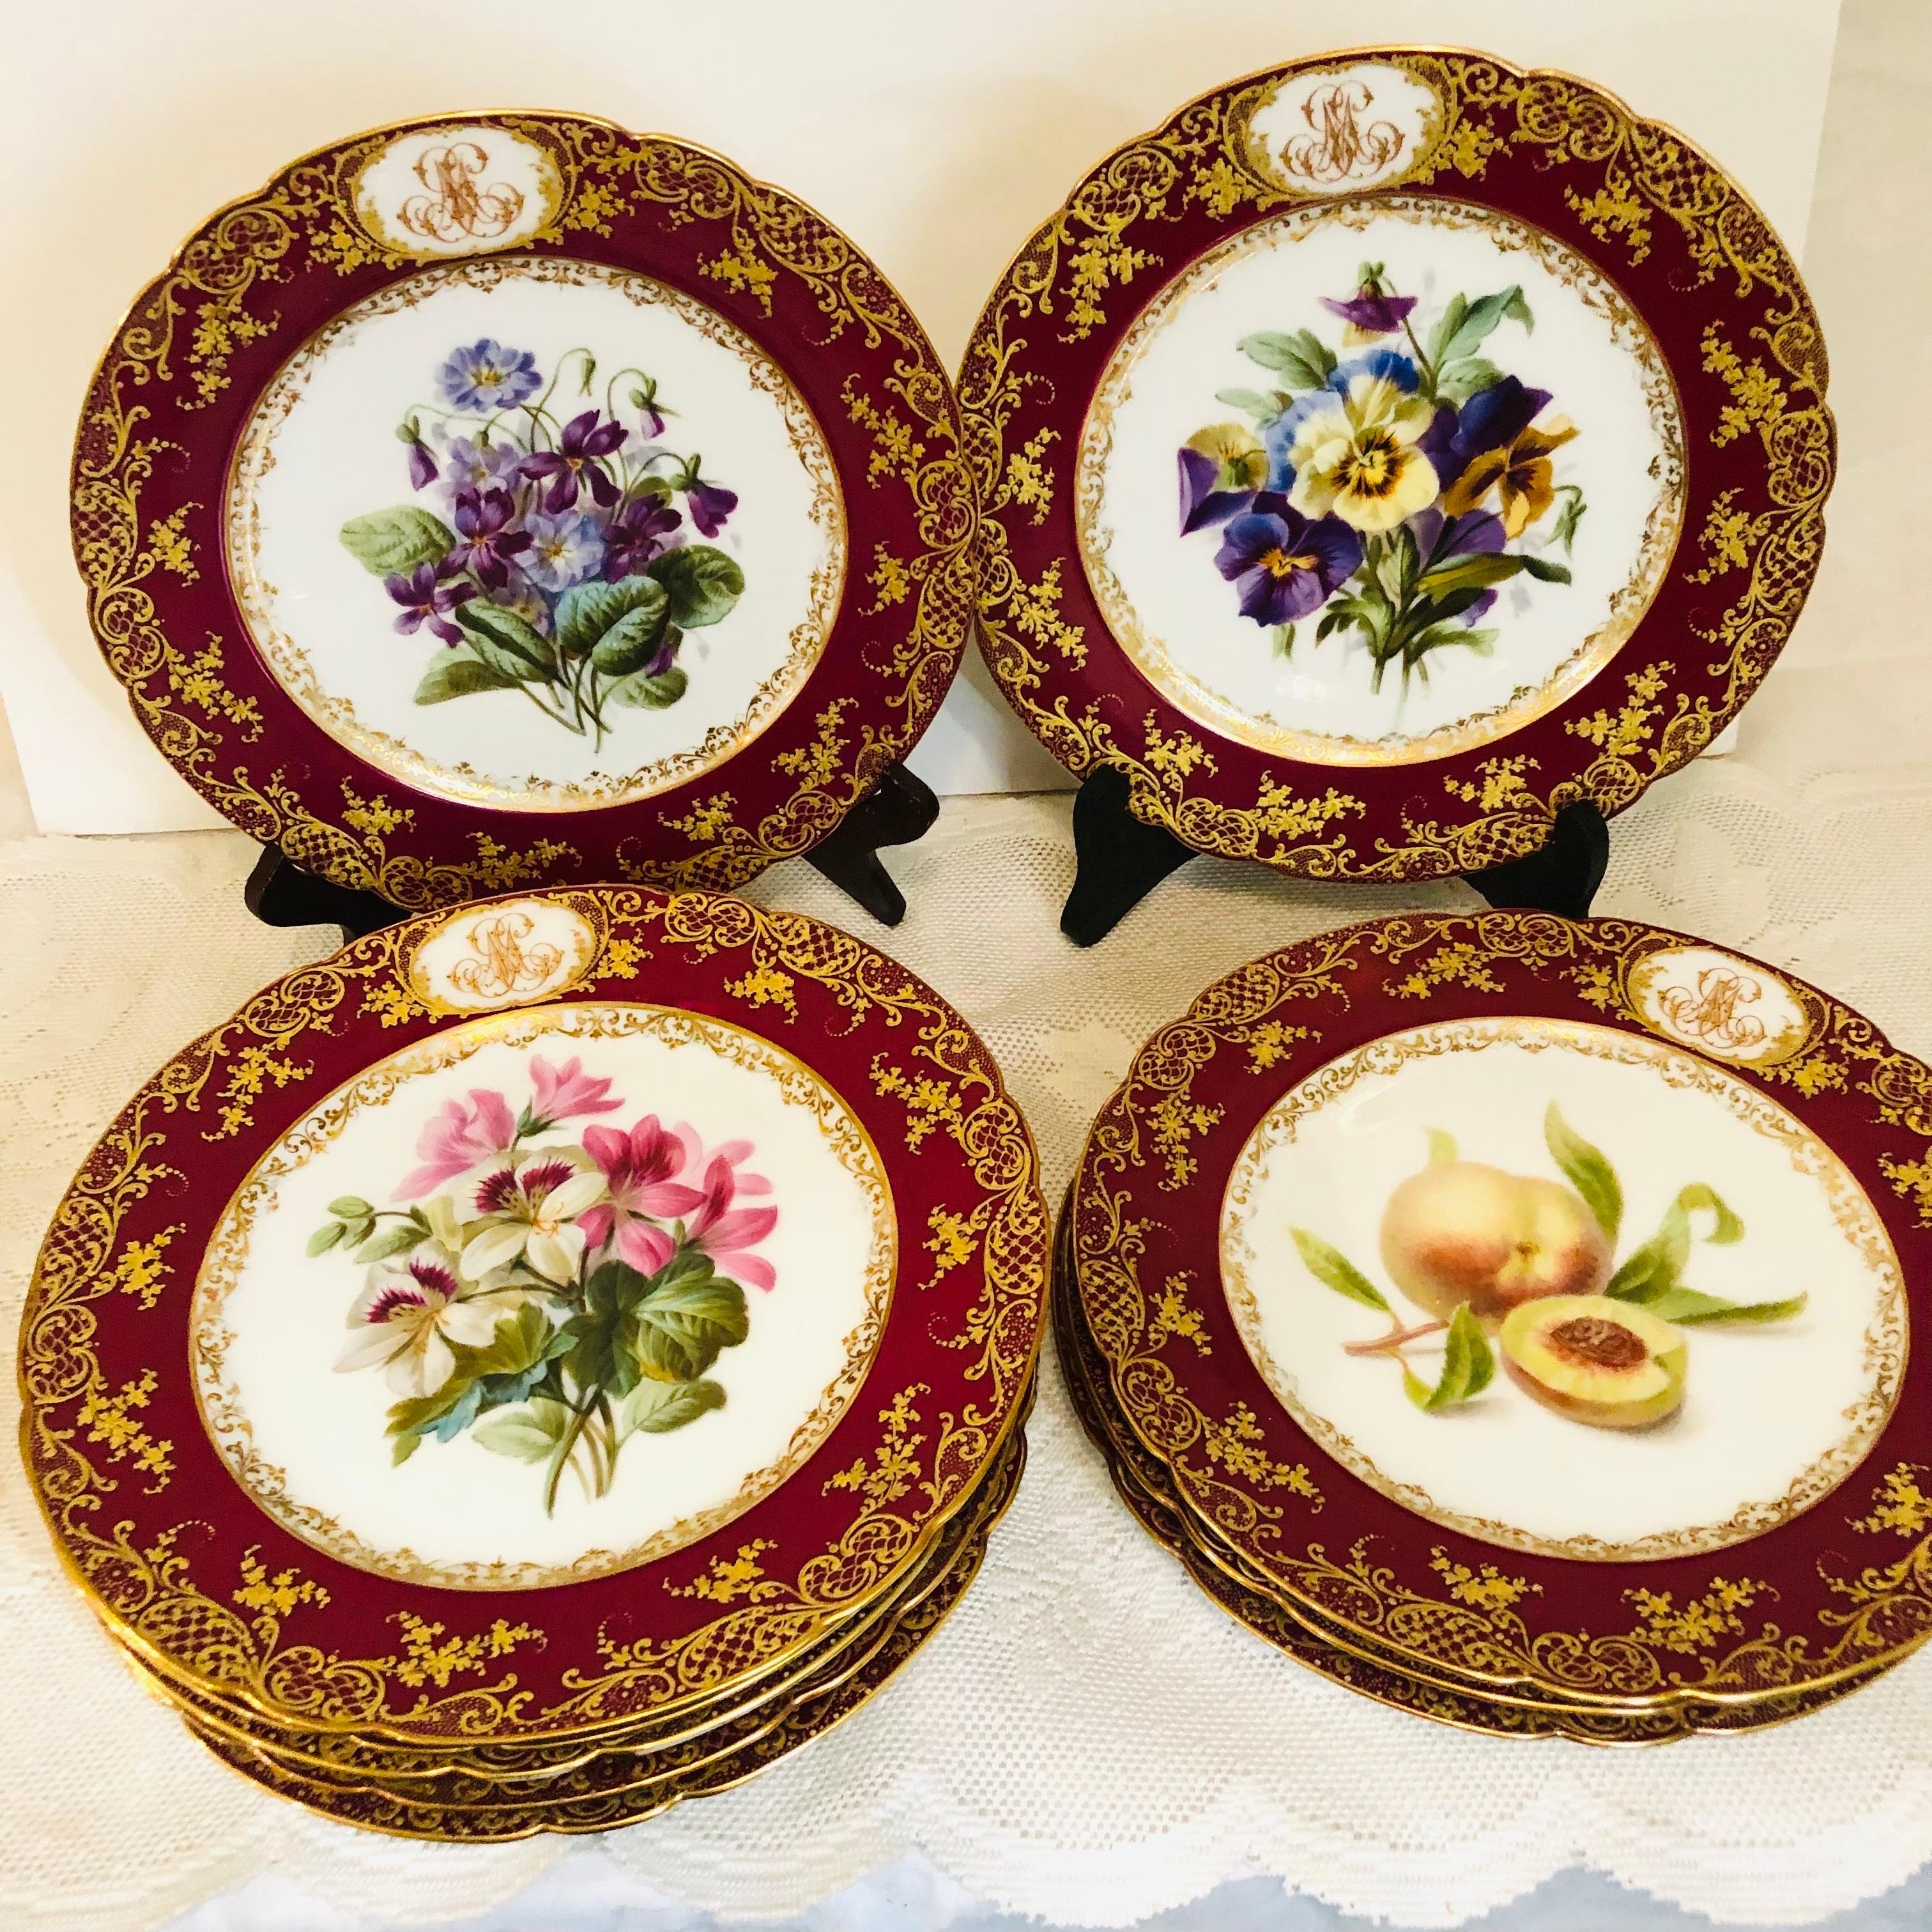 Look at the museum quality paintings of flower bouquets and fruits on this set of ten Old Paris Porcelain plates painted by the studio of Boyer Rue De La Paix. These were made in the mid 19th century. Each plate has a different central beautifully